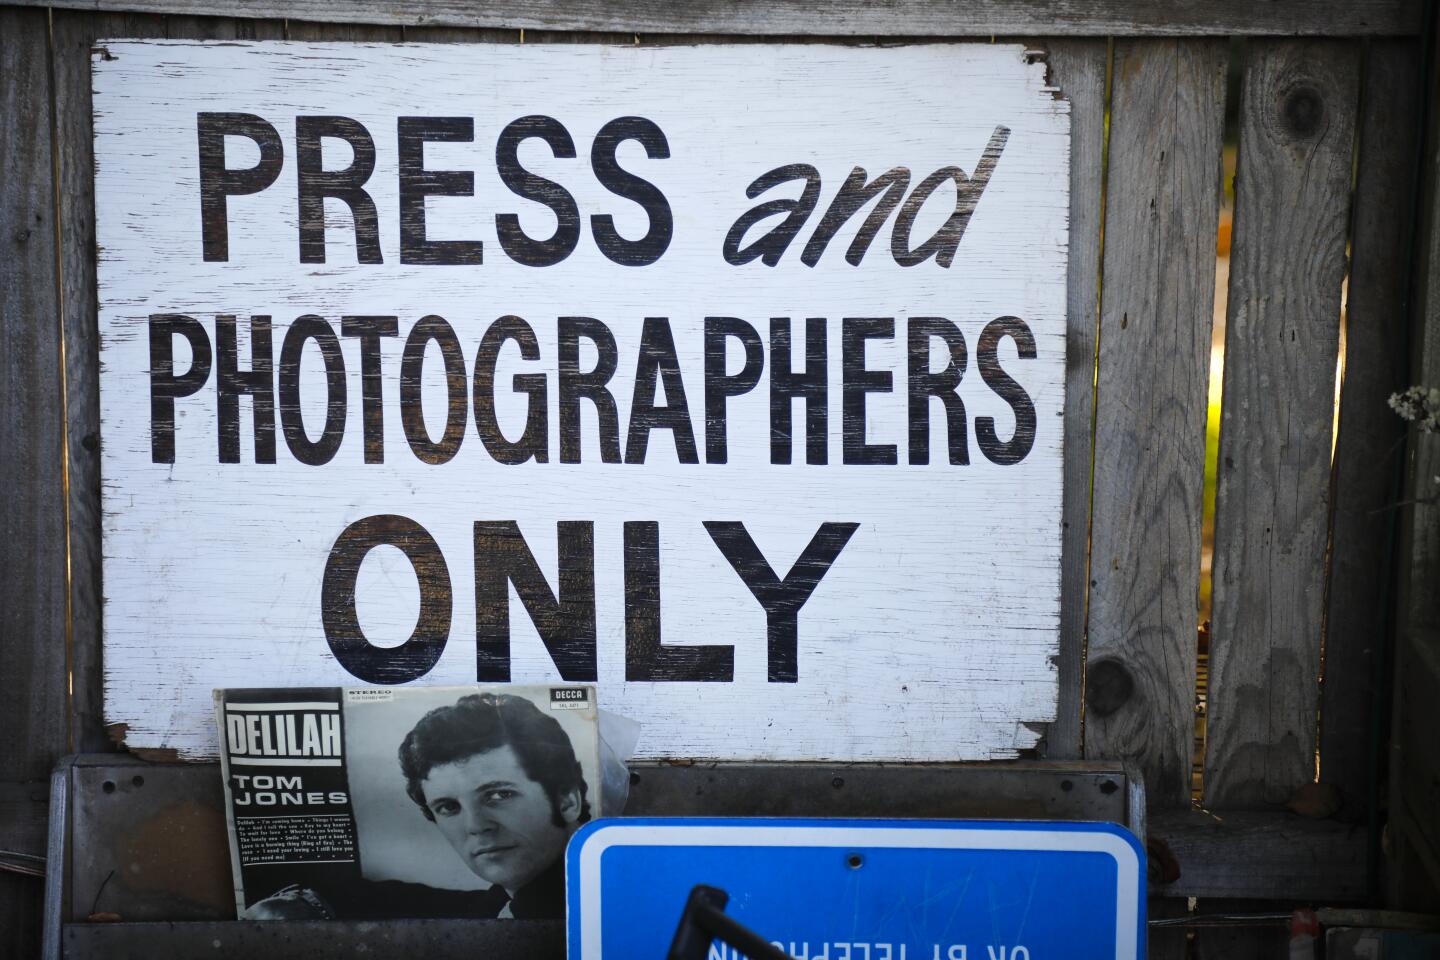 A press and photographers only sign and a Tom Jones record album are but two of the unique items at Lhooq Books, a funky vintage bookstore in Carlsbad Village. Sean Christopher, the owner recently received a 60-day eviction notice for both the shop and the adjoining house where he has raised his son, alone. He's hoping to achieve a stay of eviction on the property long enough to sell off his book inventory and find a new space without going bankrupt and ending up homeless with his son.